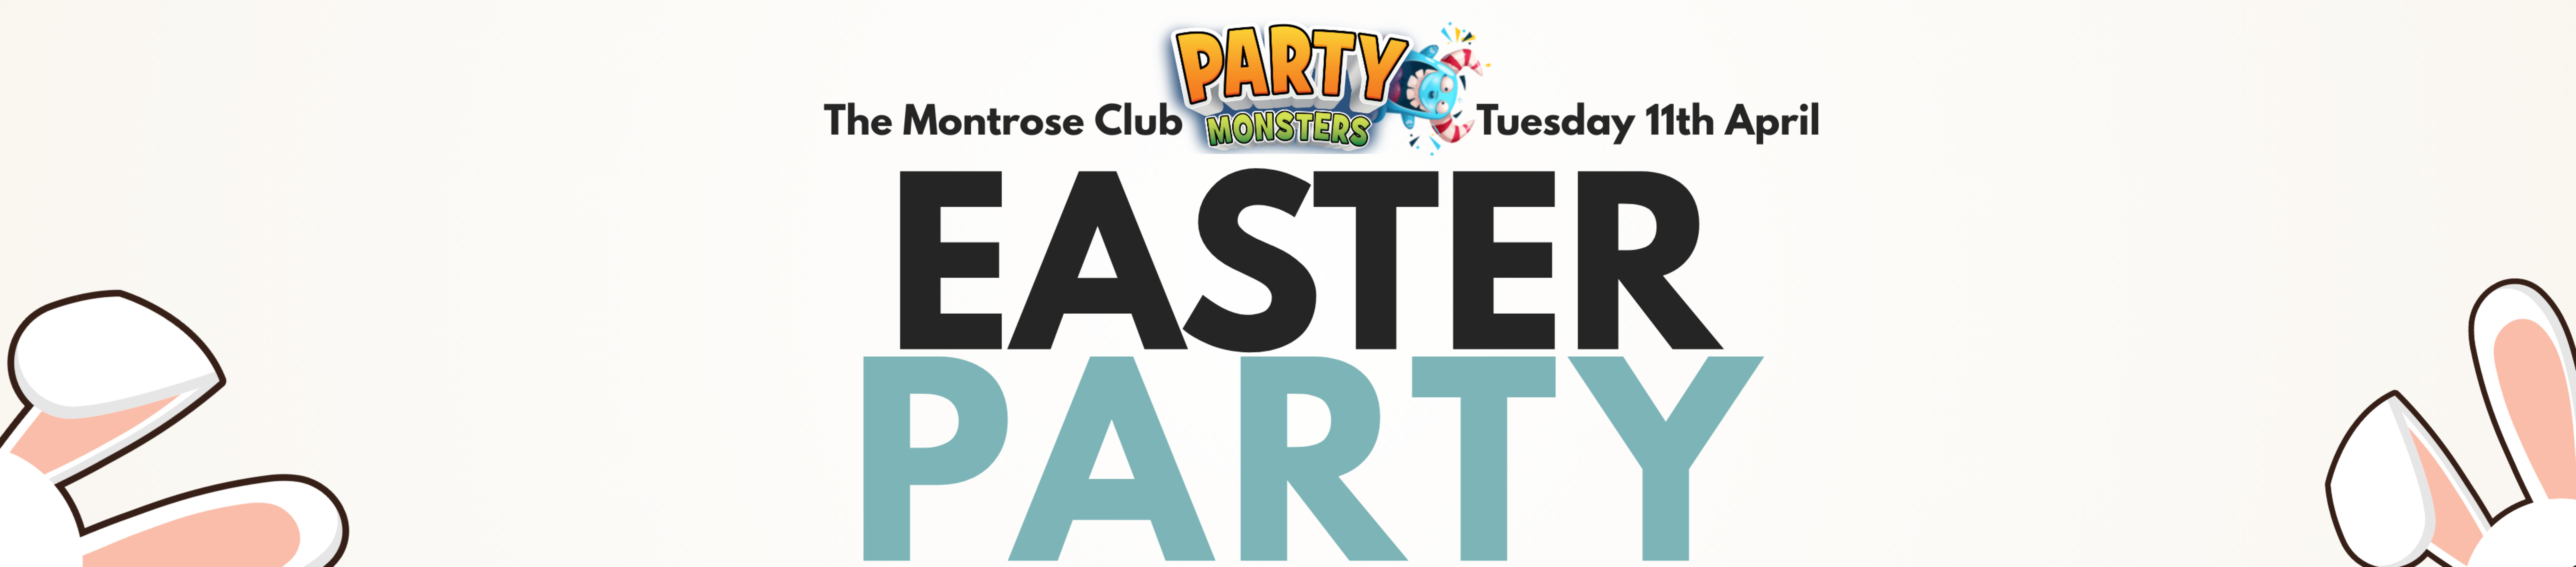 Party Monsters Easter Party At The Montrose Park Club